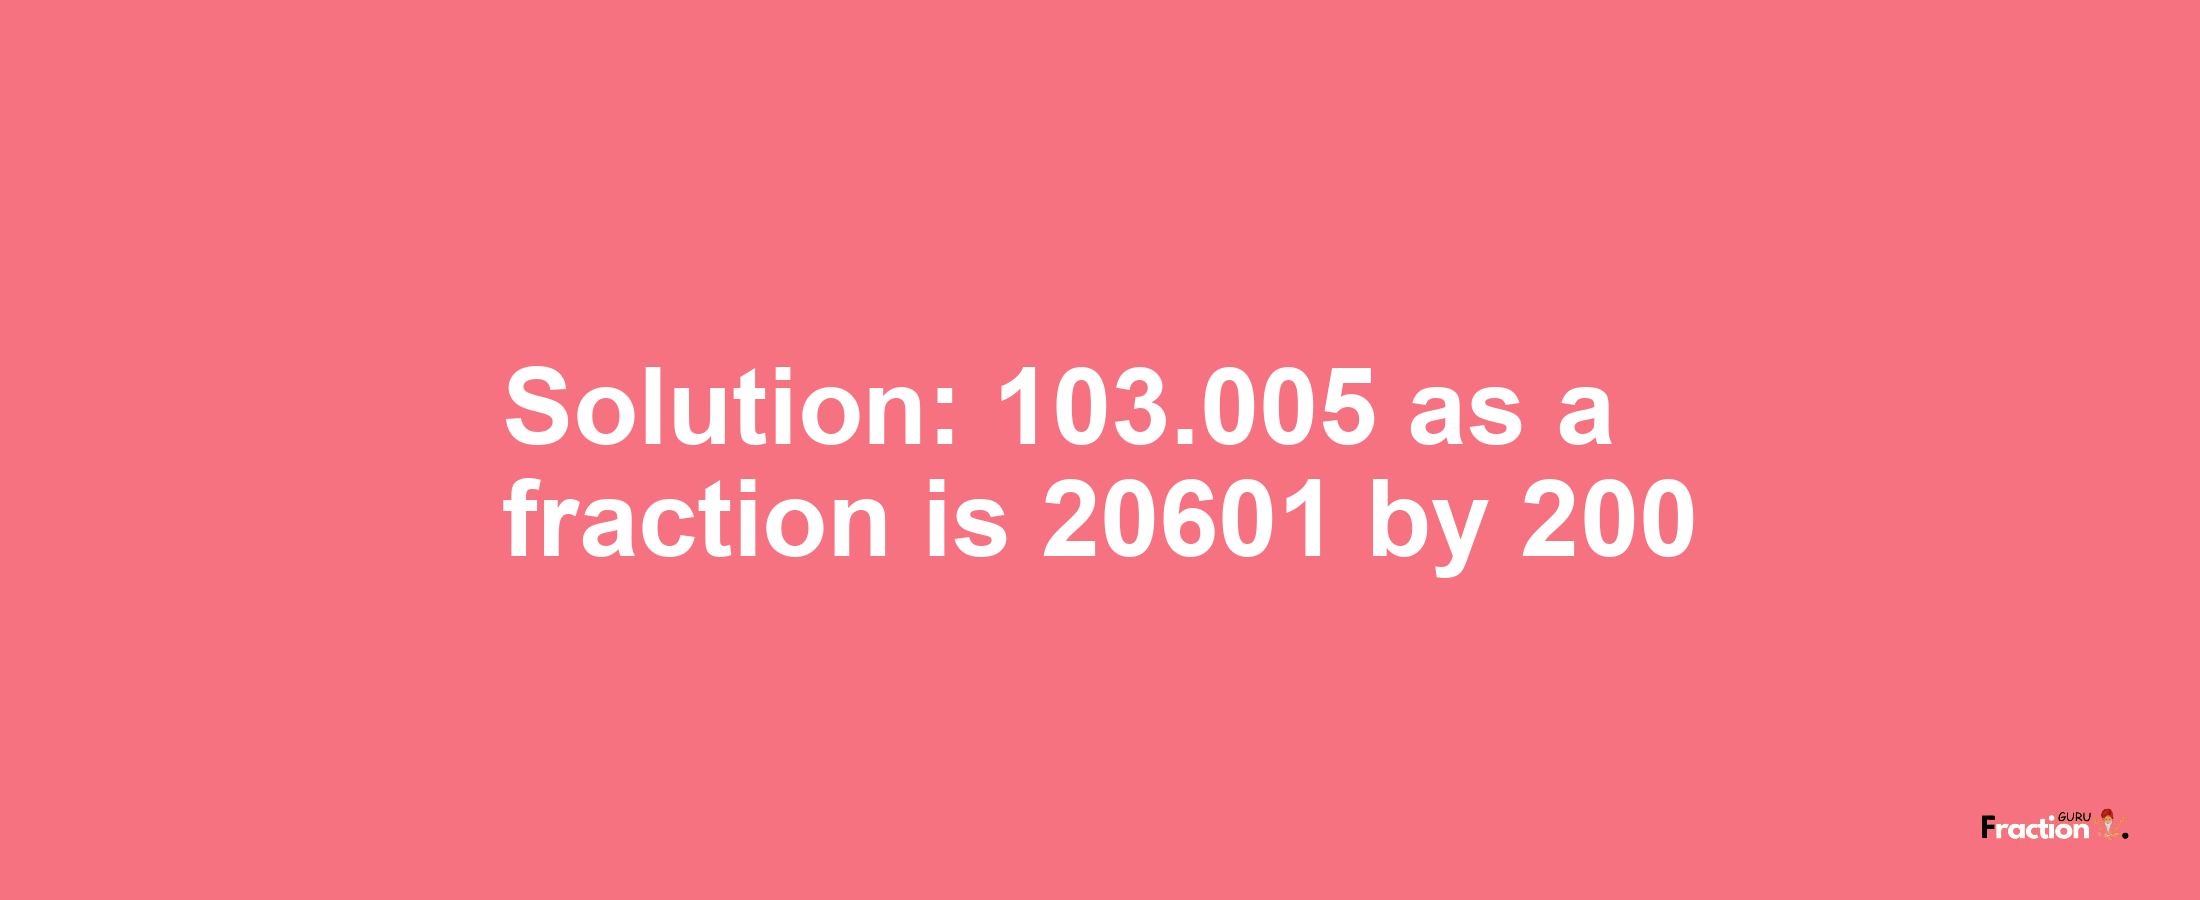 Solution:103.005 as a fraction is 20601/200